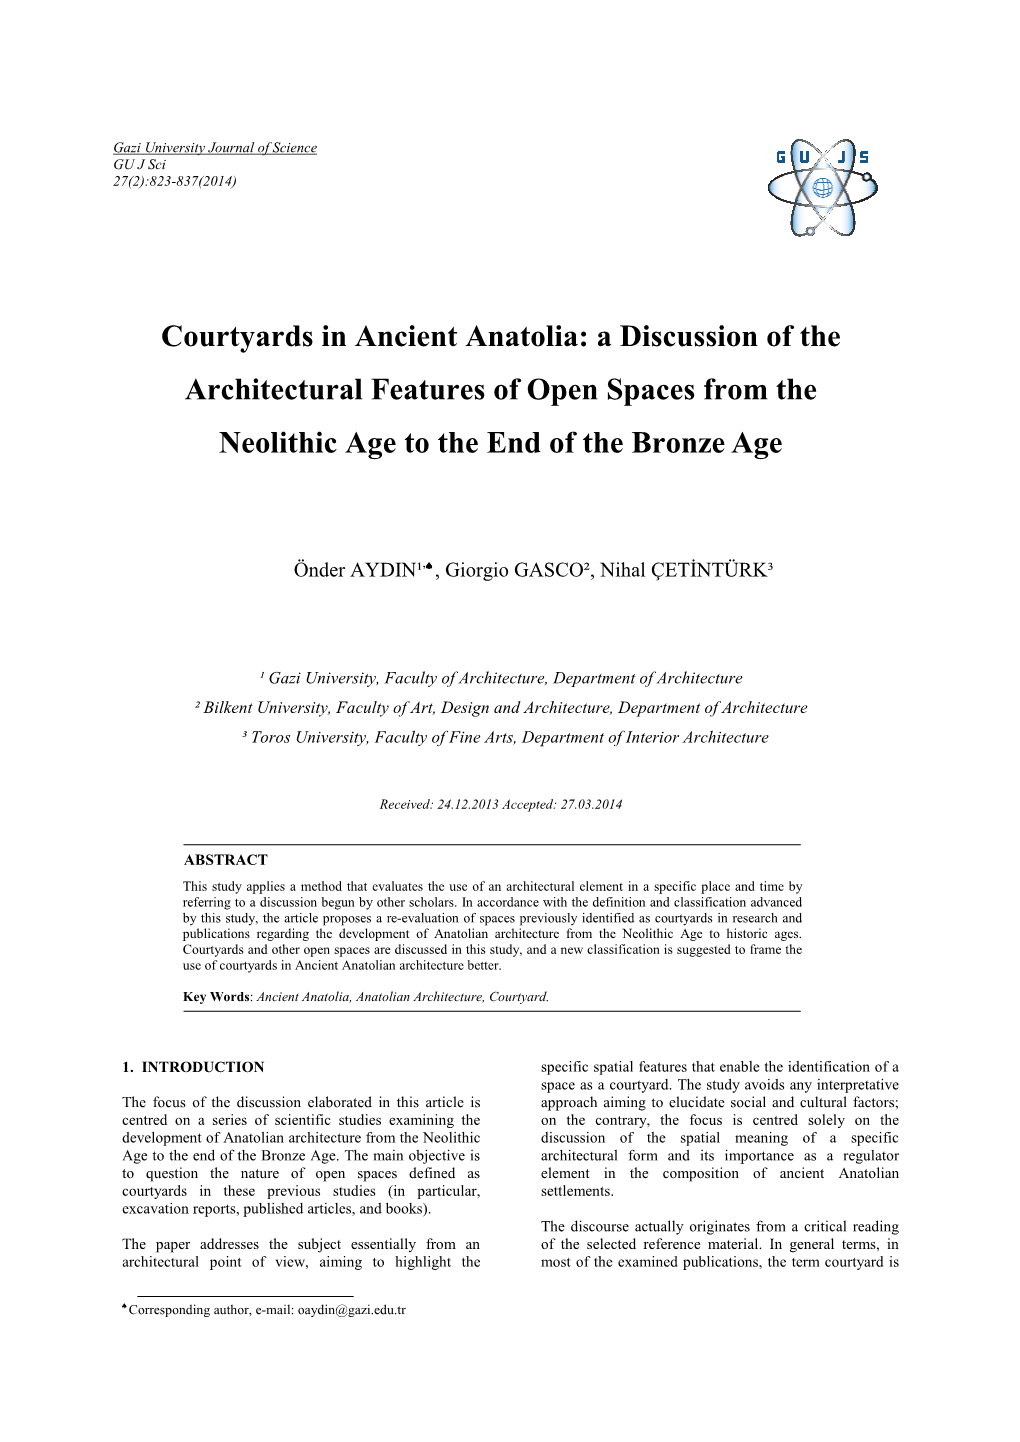 Courtyards in Ancient Anatolia: a Discussion of the Architectural Features of Open Spaces from The